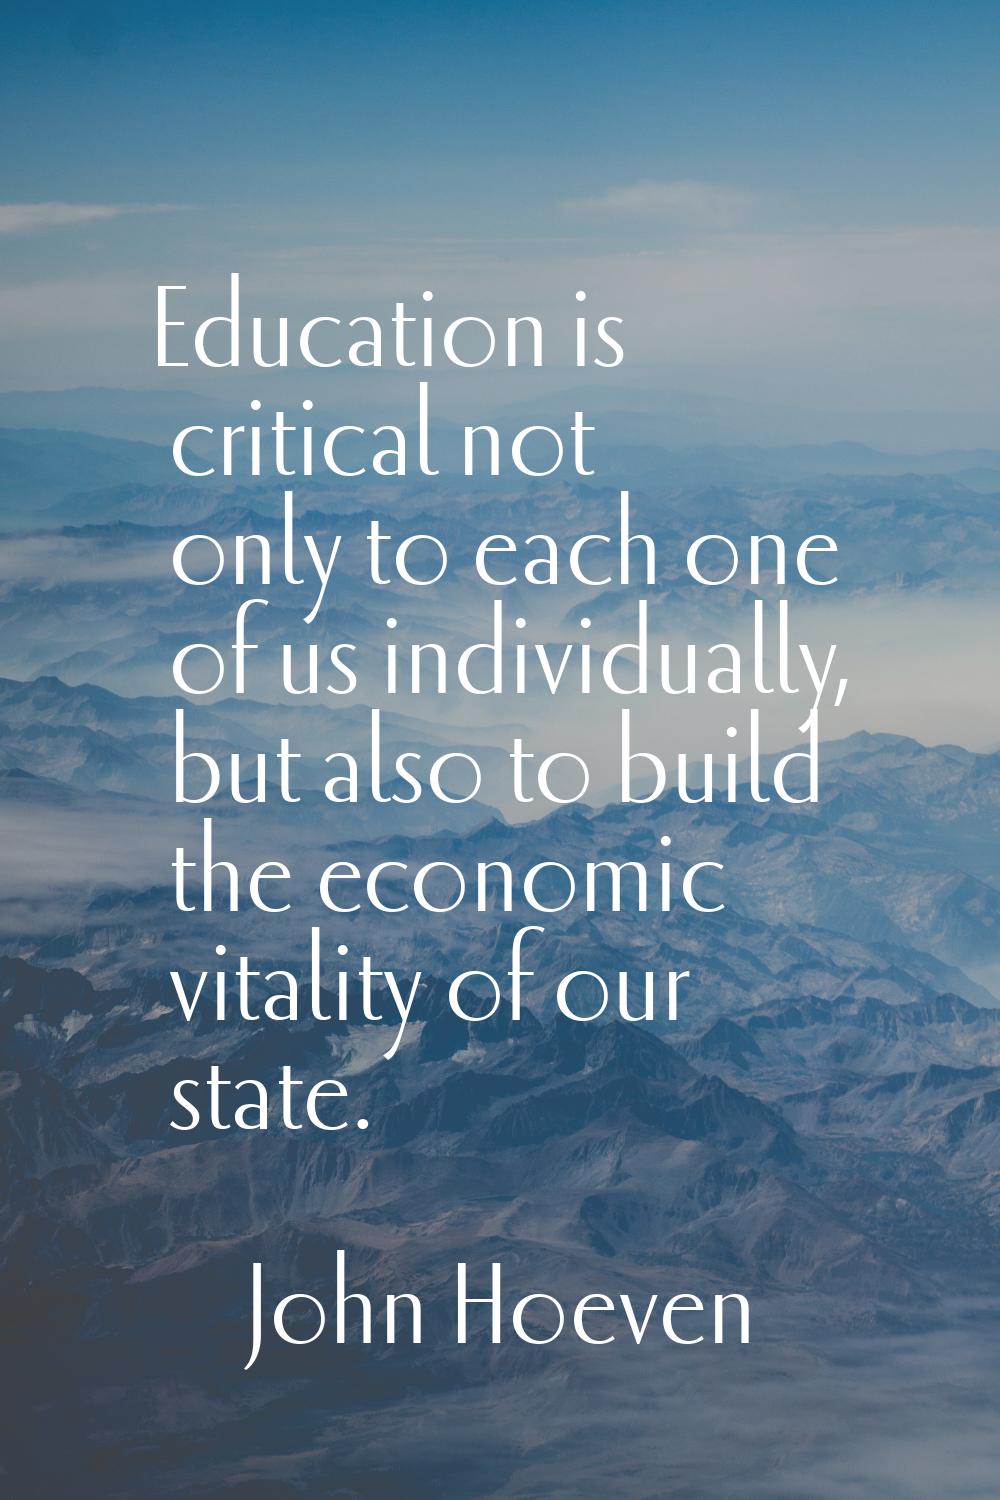 Education is critical not only to each one of us individually, but also to build the economic vital